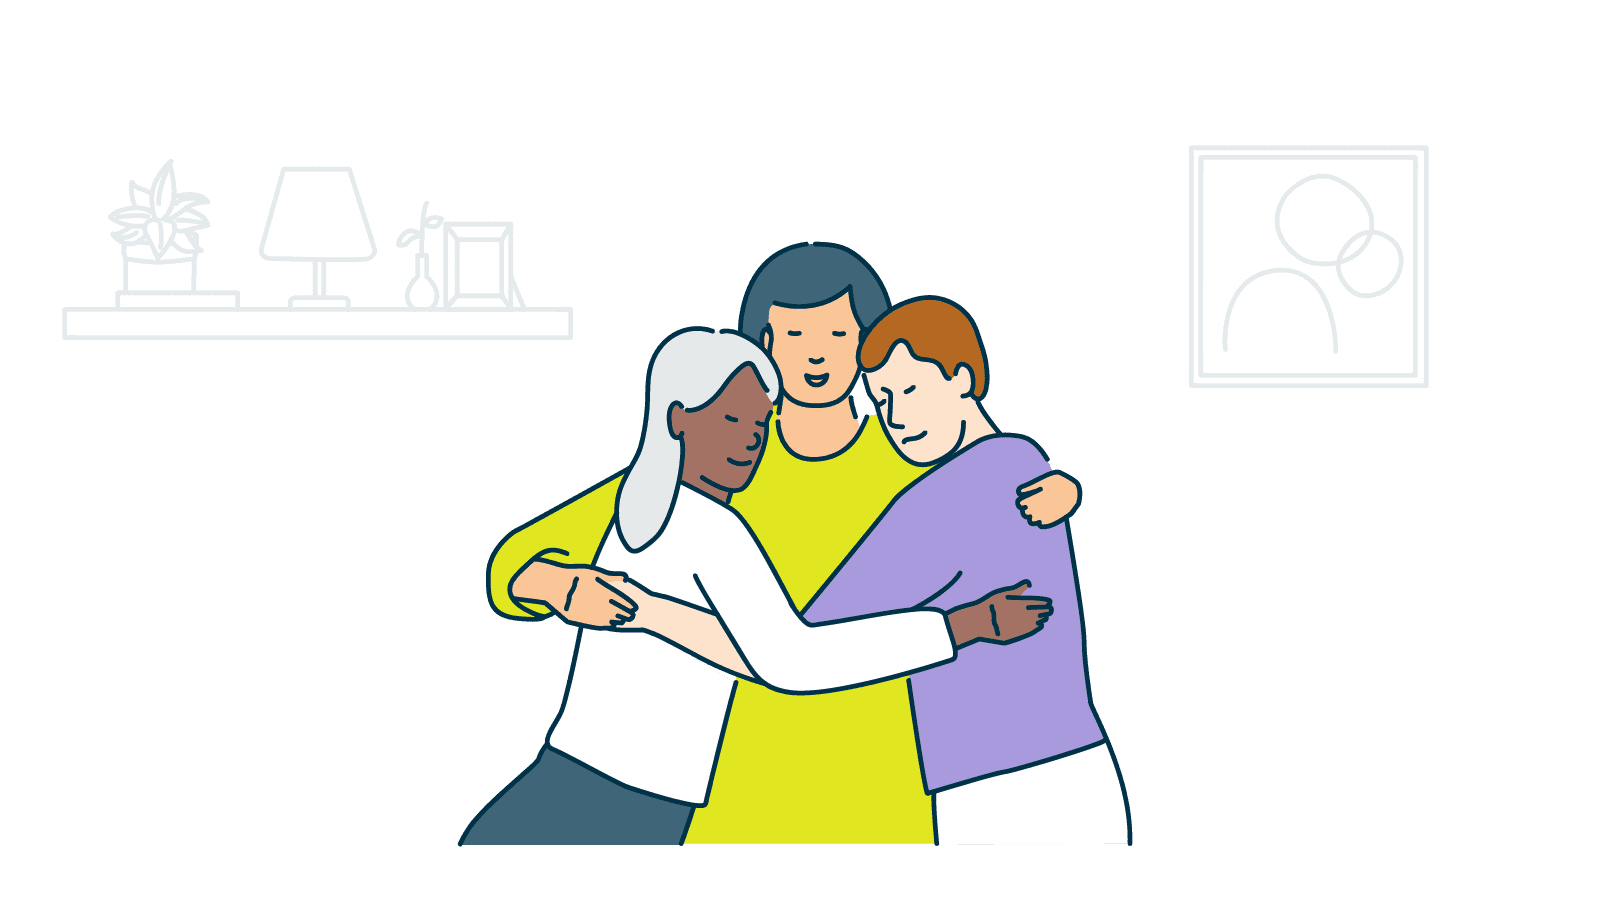 A group of people of various ages in a big group hug.